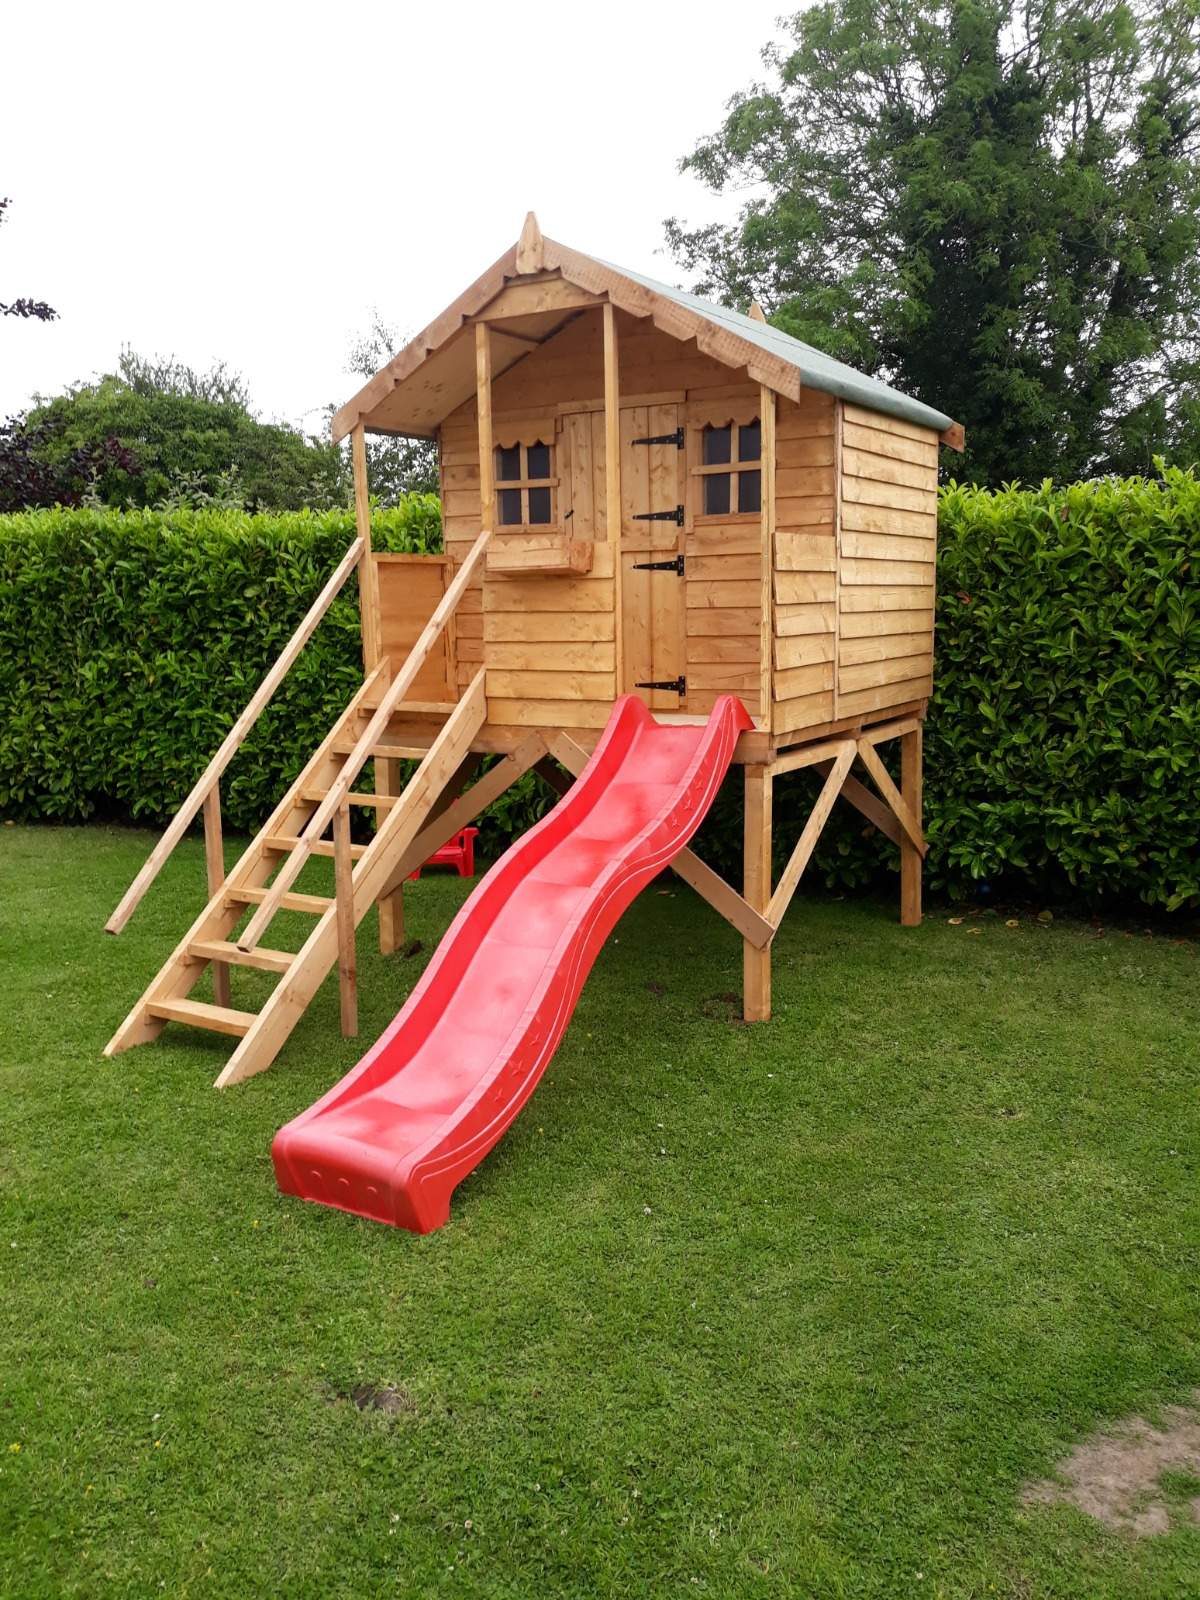 Standard 6x6 Treehouse With Slide